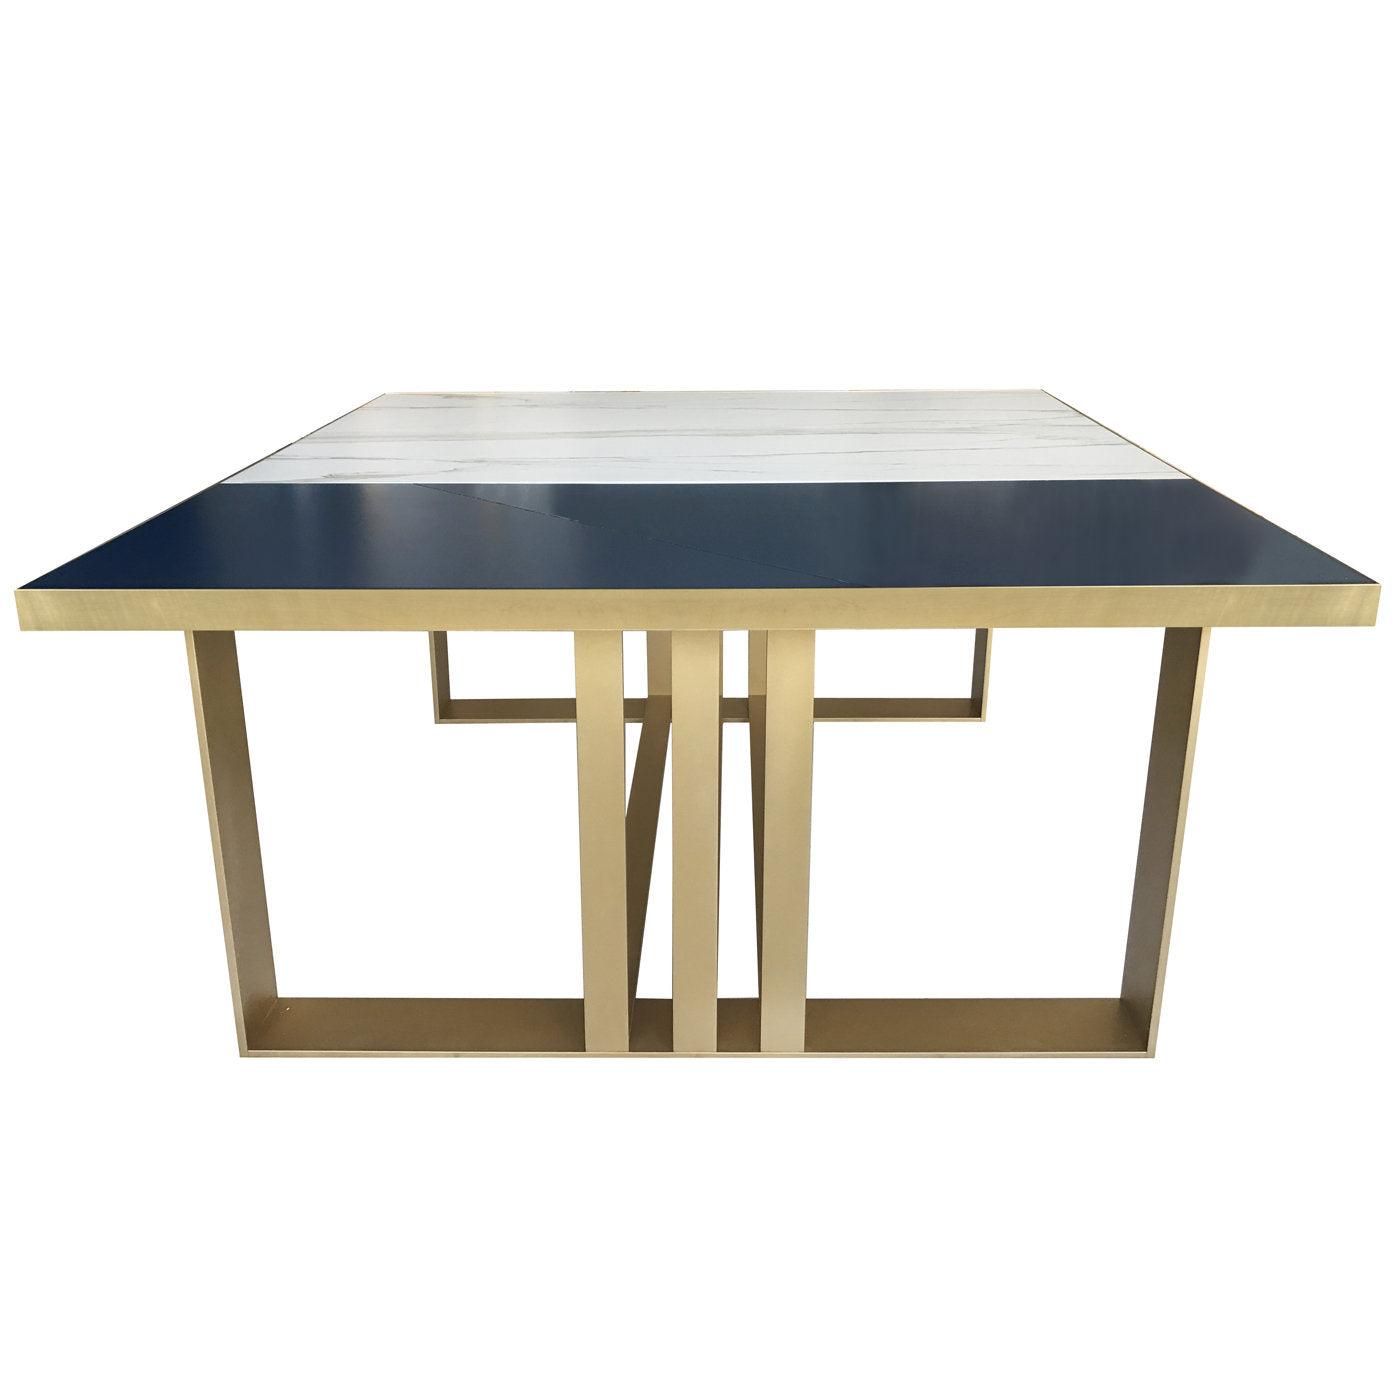 T2 Dining Table - Alternative view 1